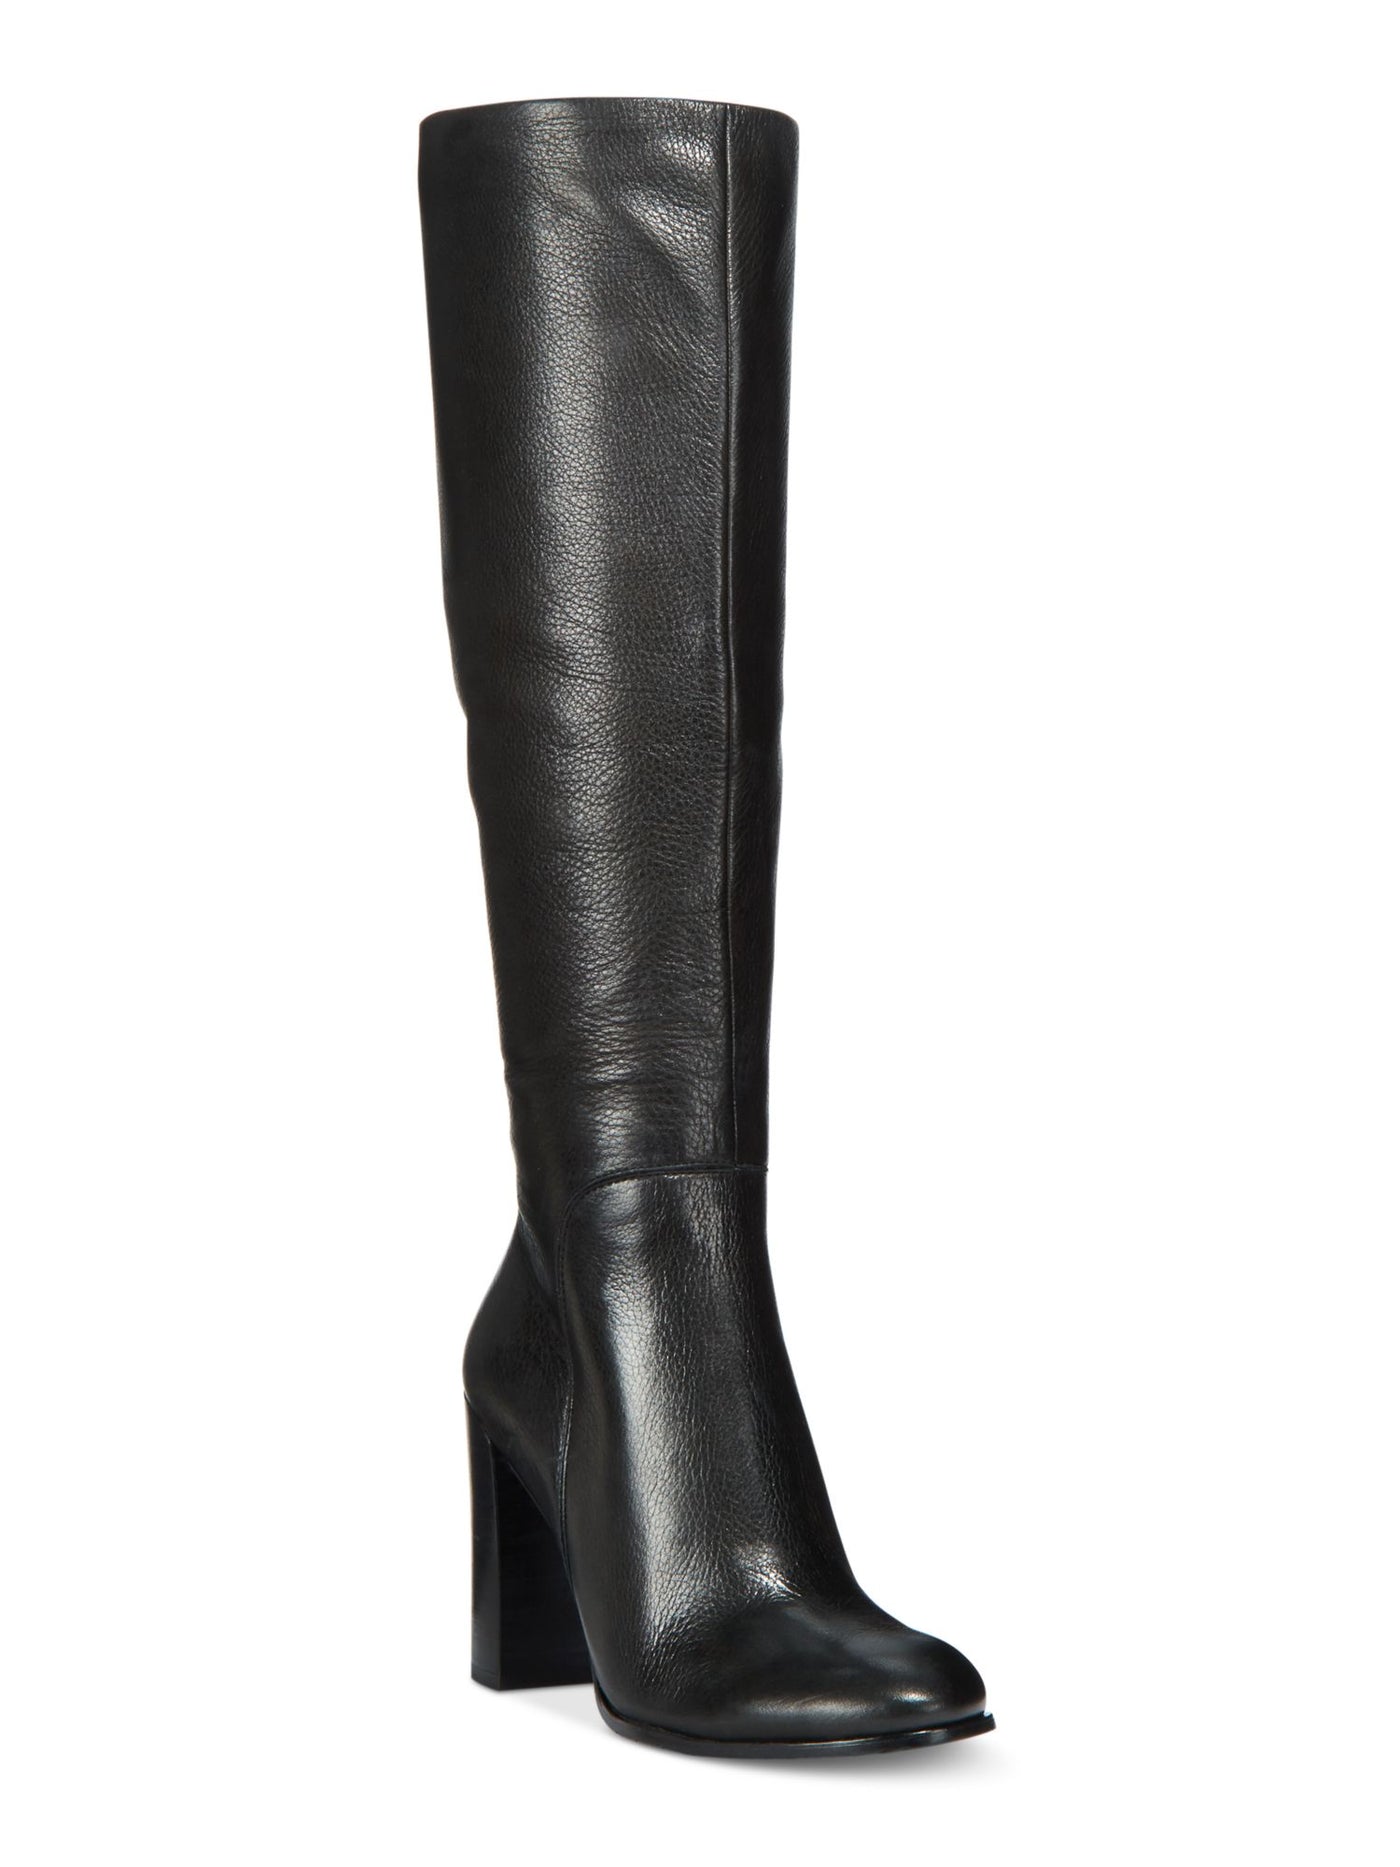 KENNETH COLE NEW YORK Womens Black Stretch Gore Padded Justin Round Toe Block Heel Zip-Up Leather Riding Boot 7.5 M